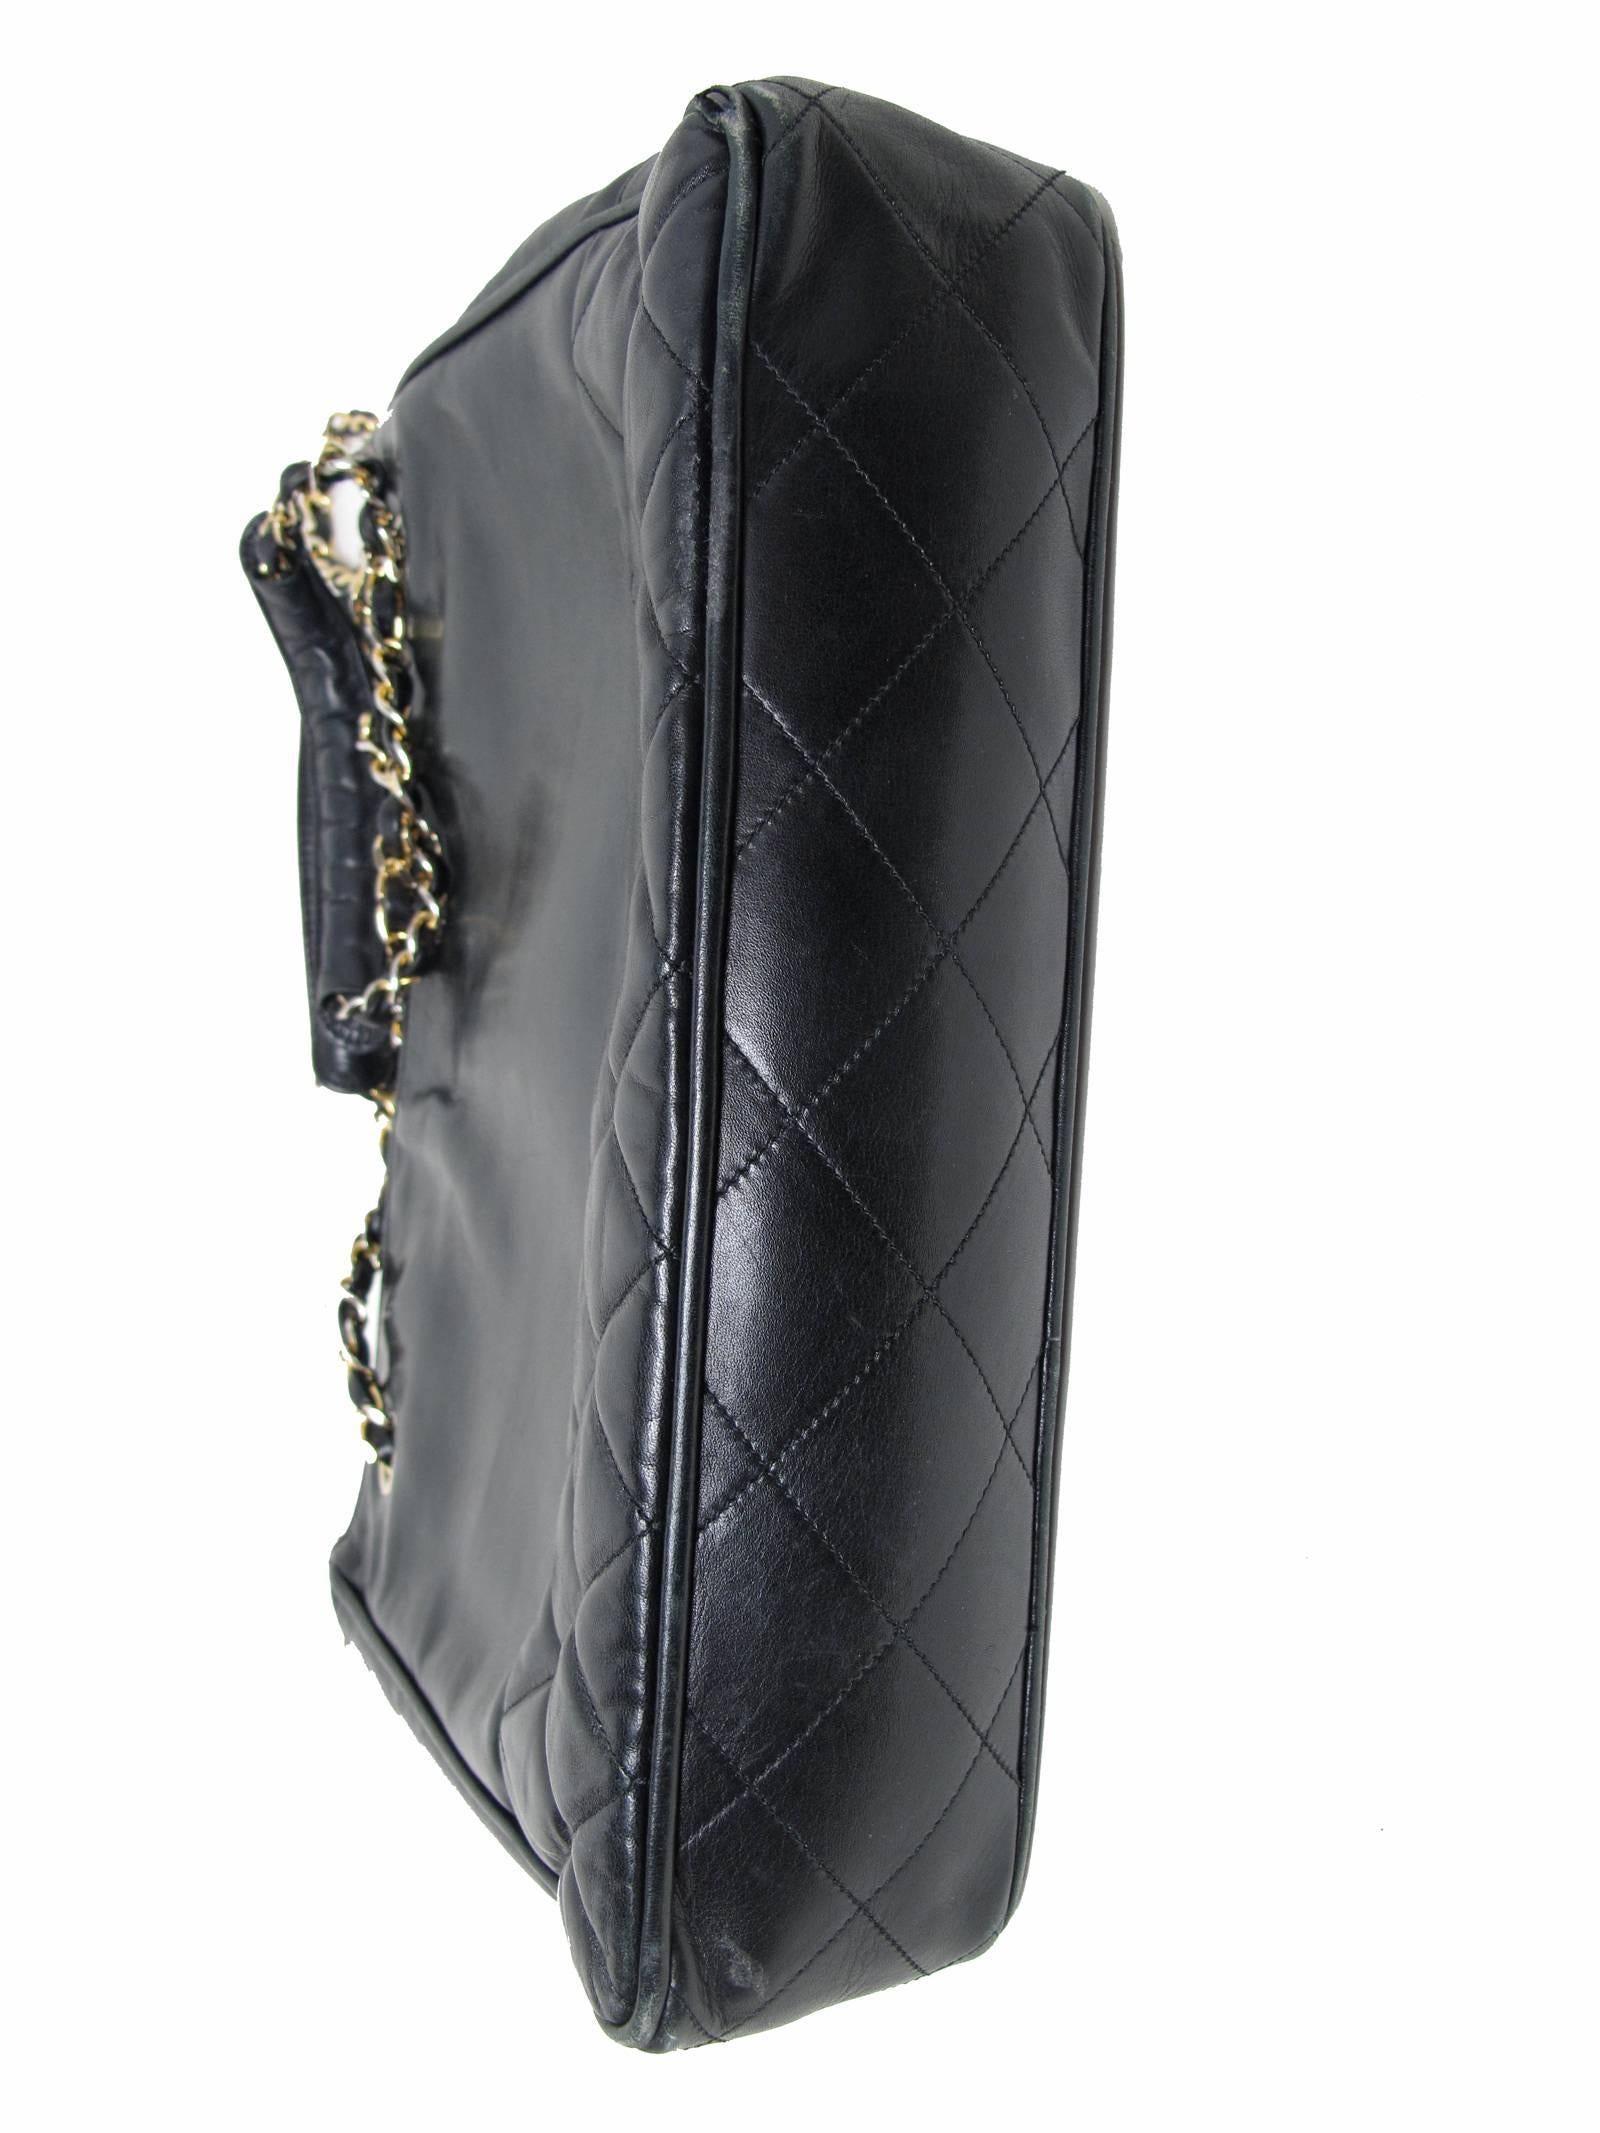 Chanel Quilted Black Leather Tote Bag 1